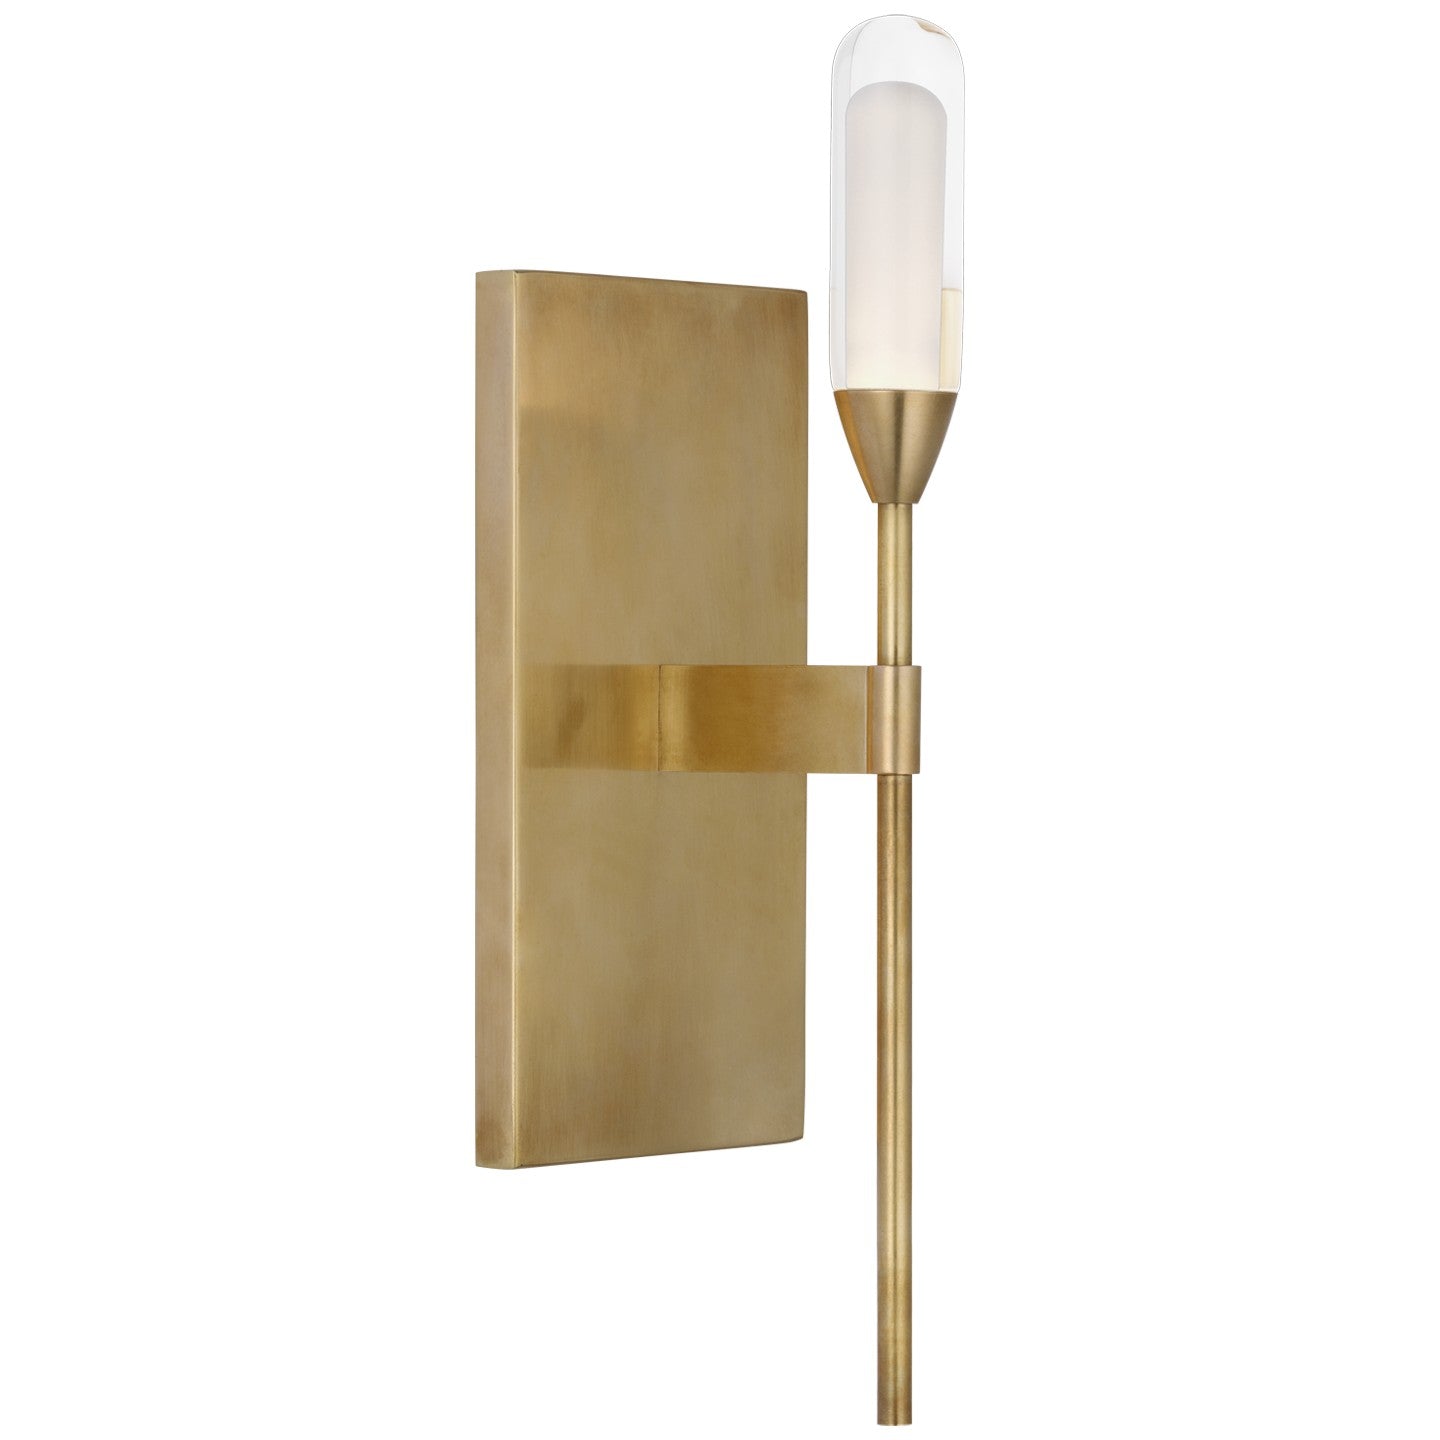 Visual Comfort Signature - PB 2030NB-CG - LED Wall Sconce - Overture - Natural Brass